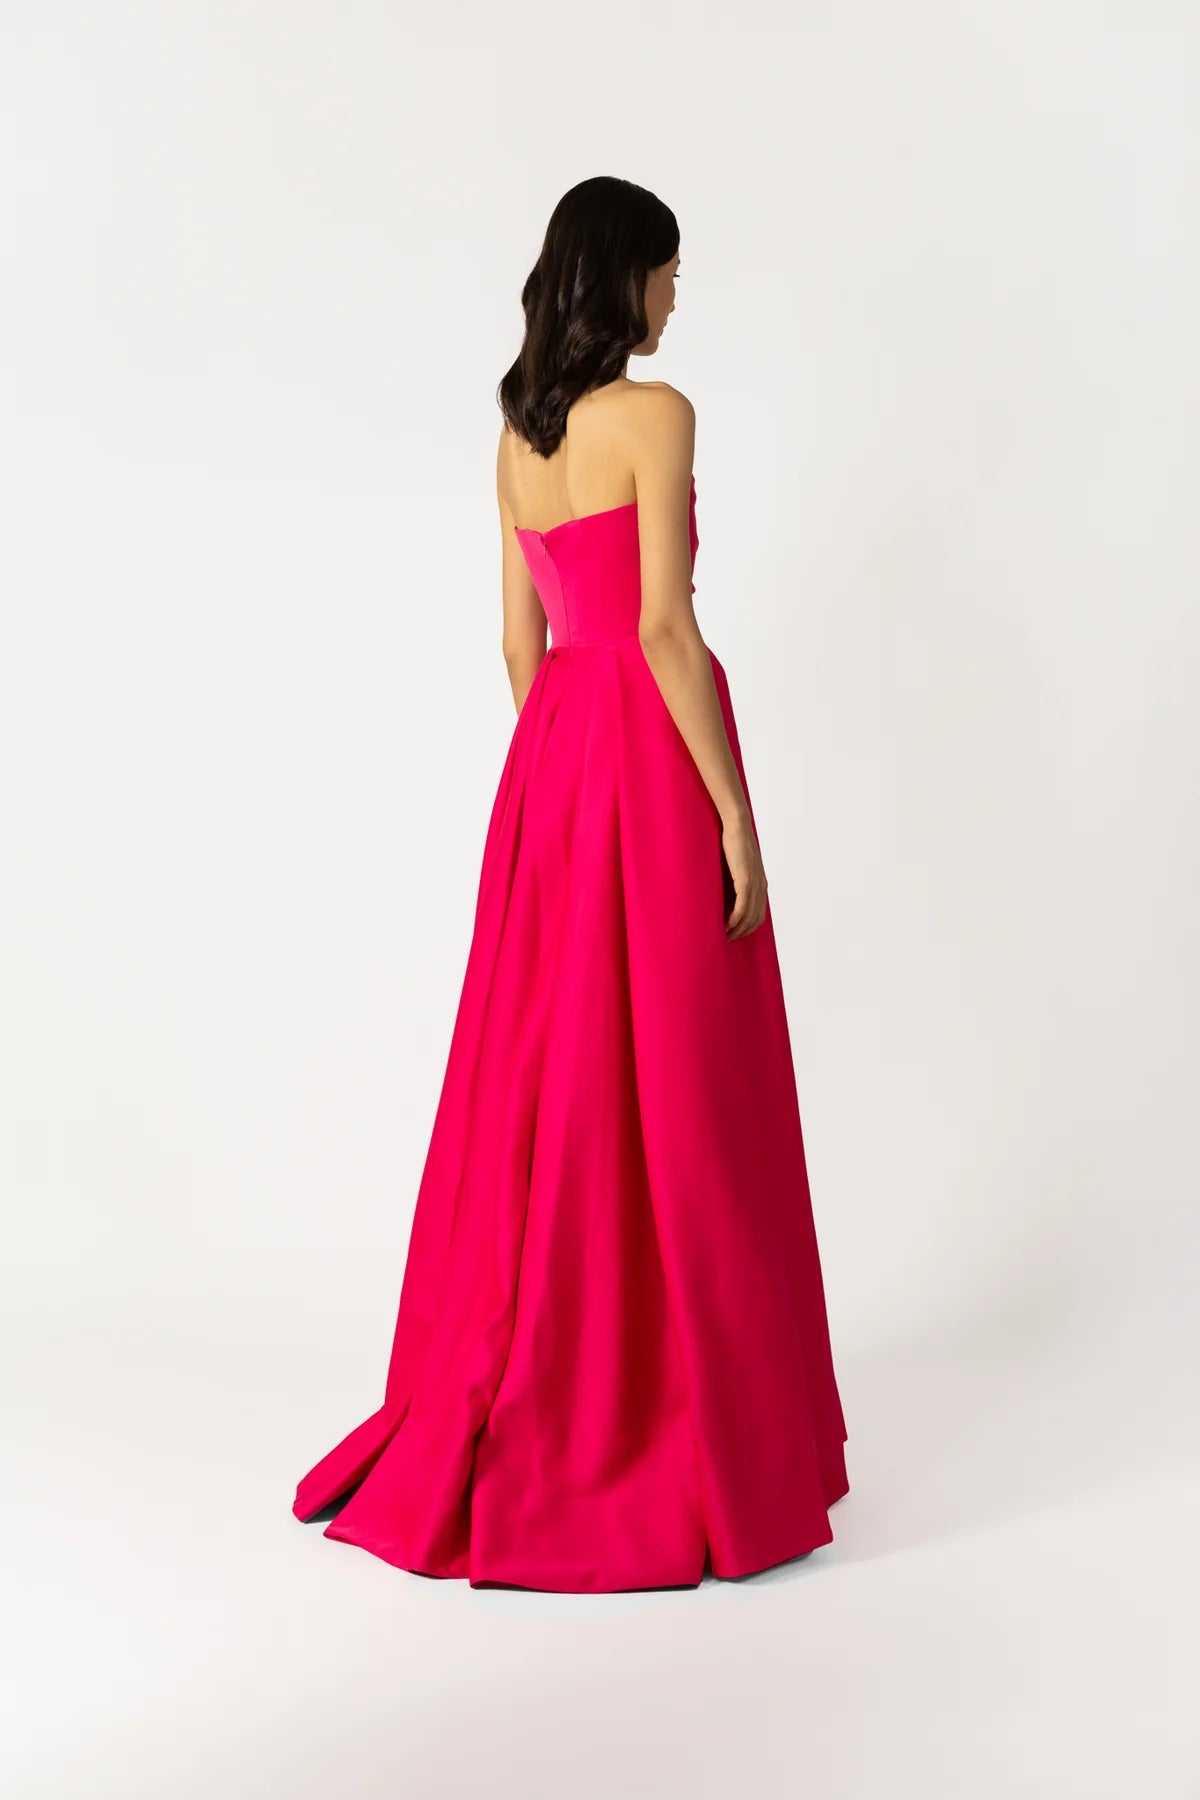 Barbara Gown in Hot Pink